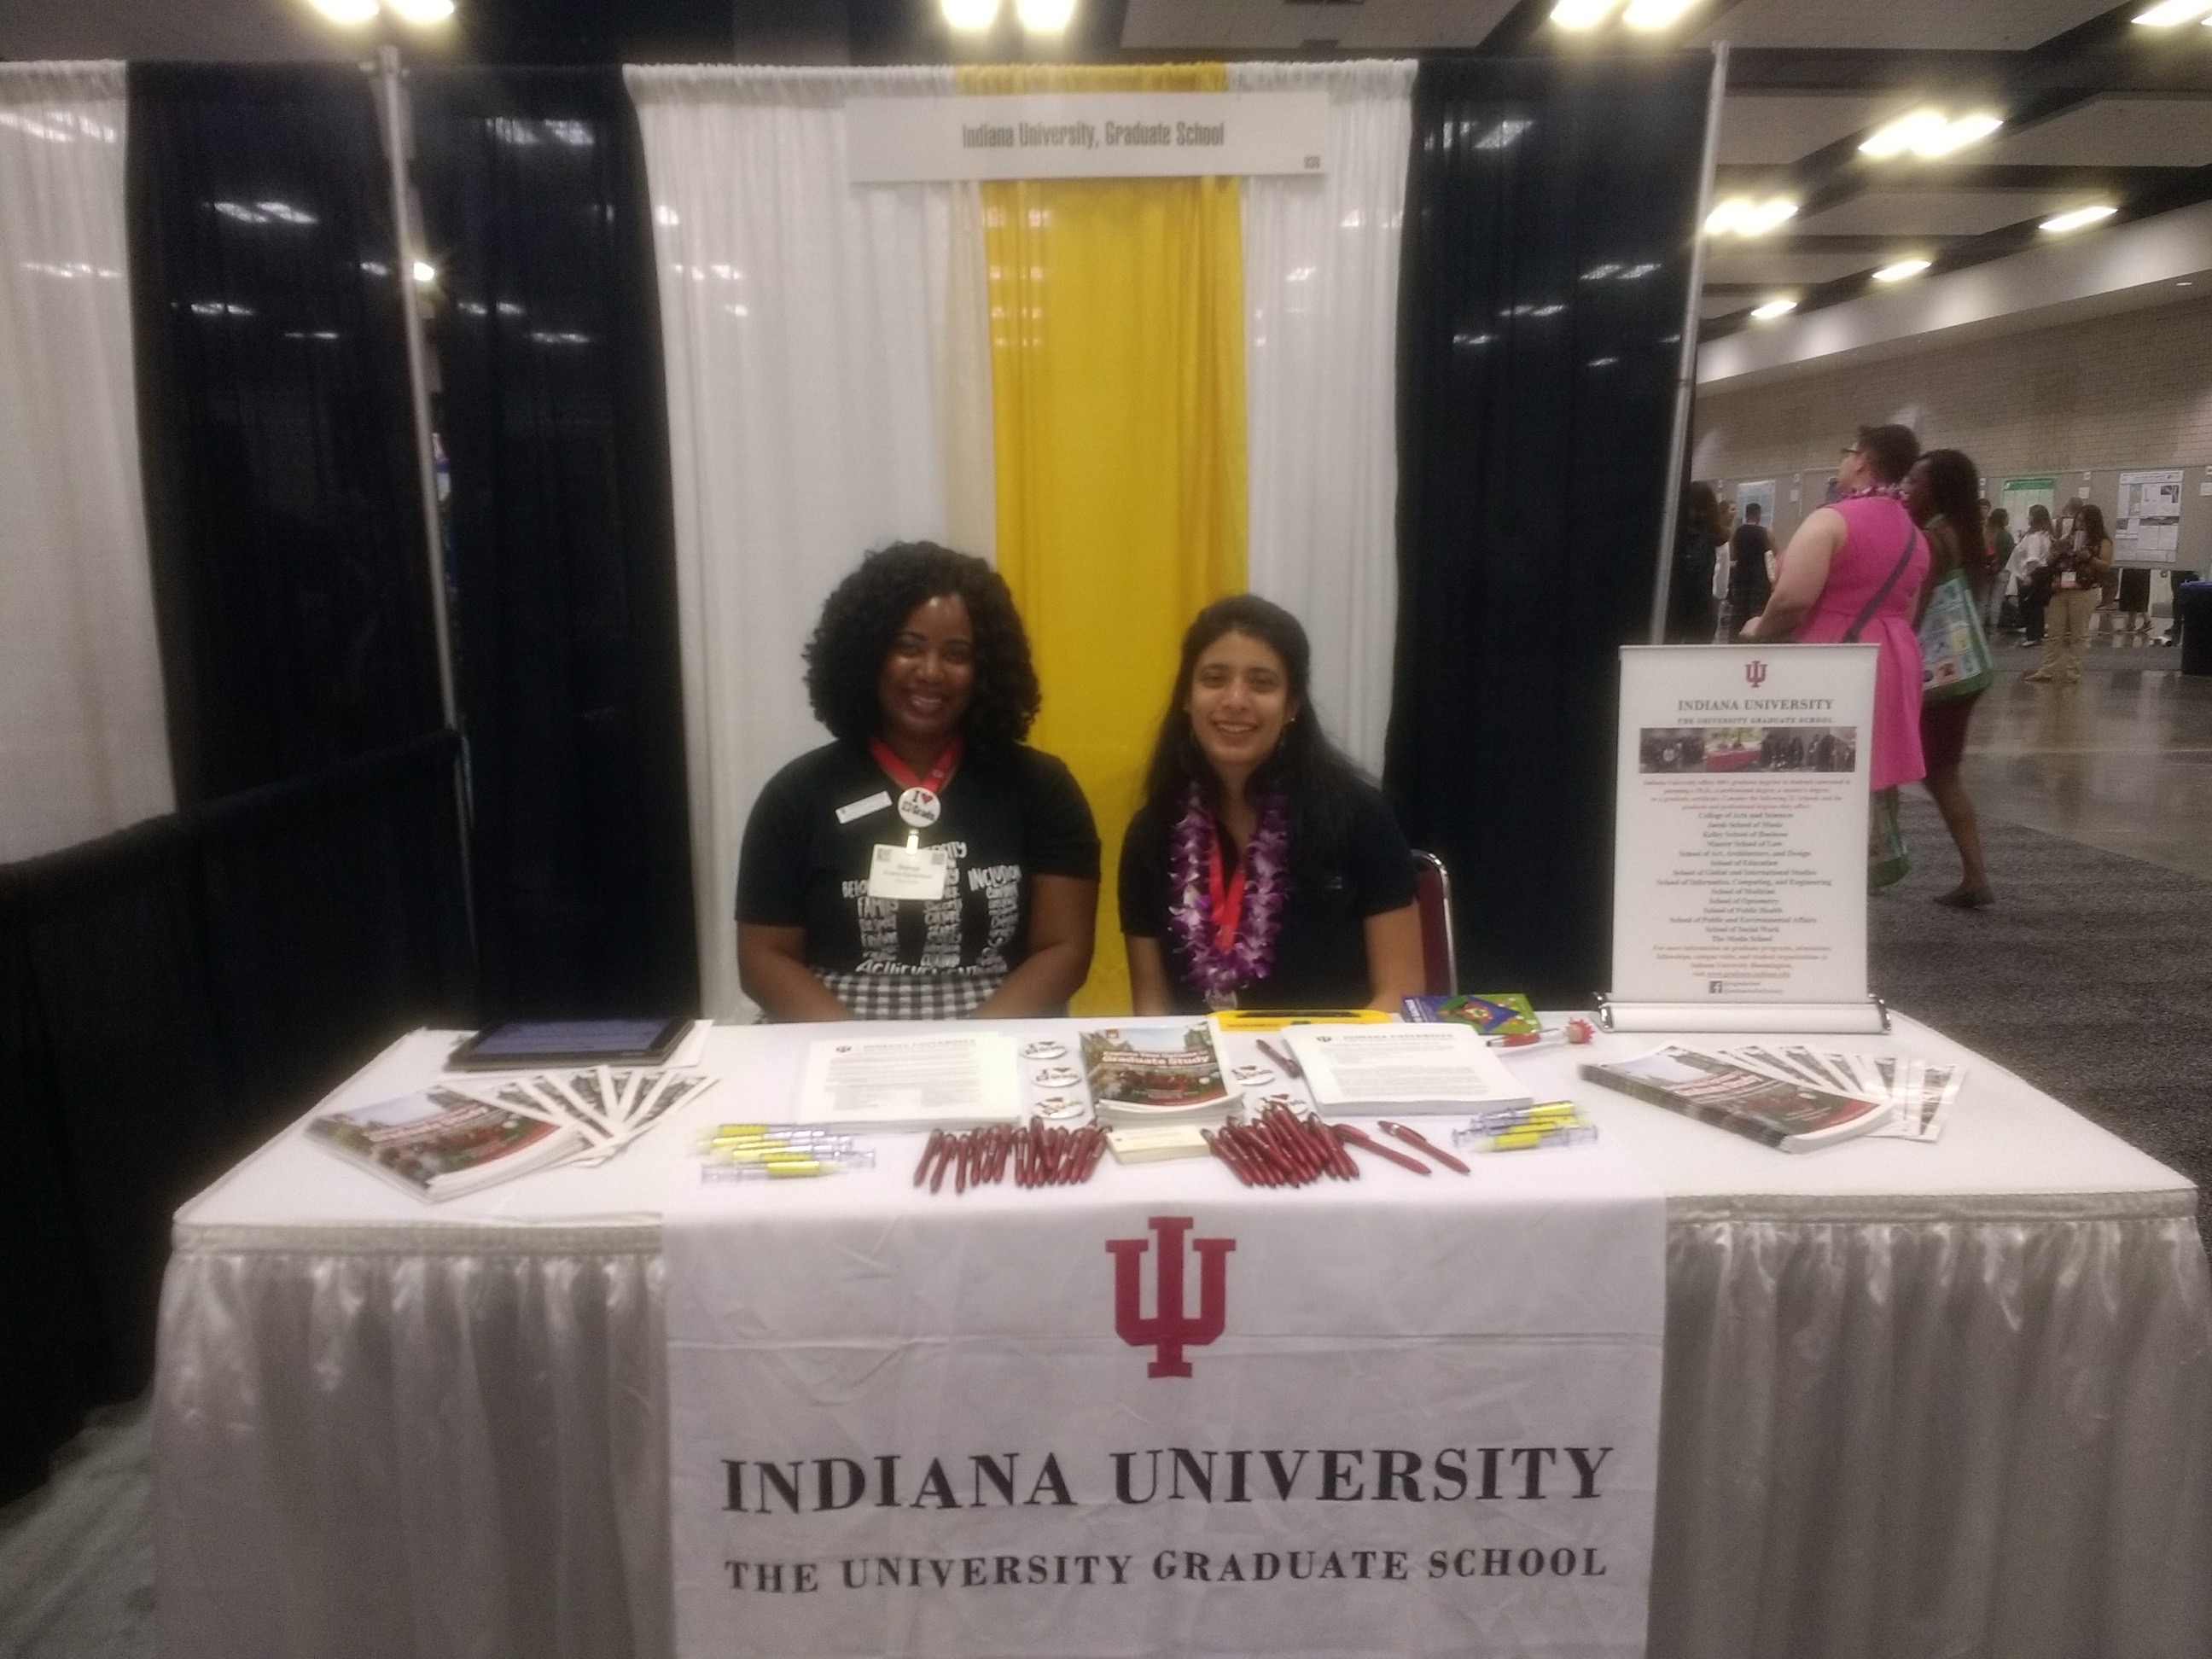 Two ladies at an Indiana University Graduate School fair booth